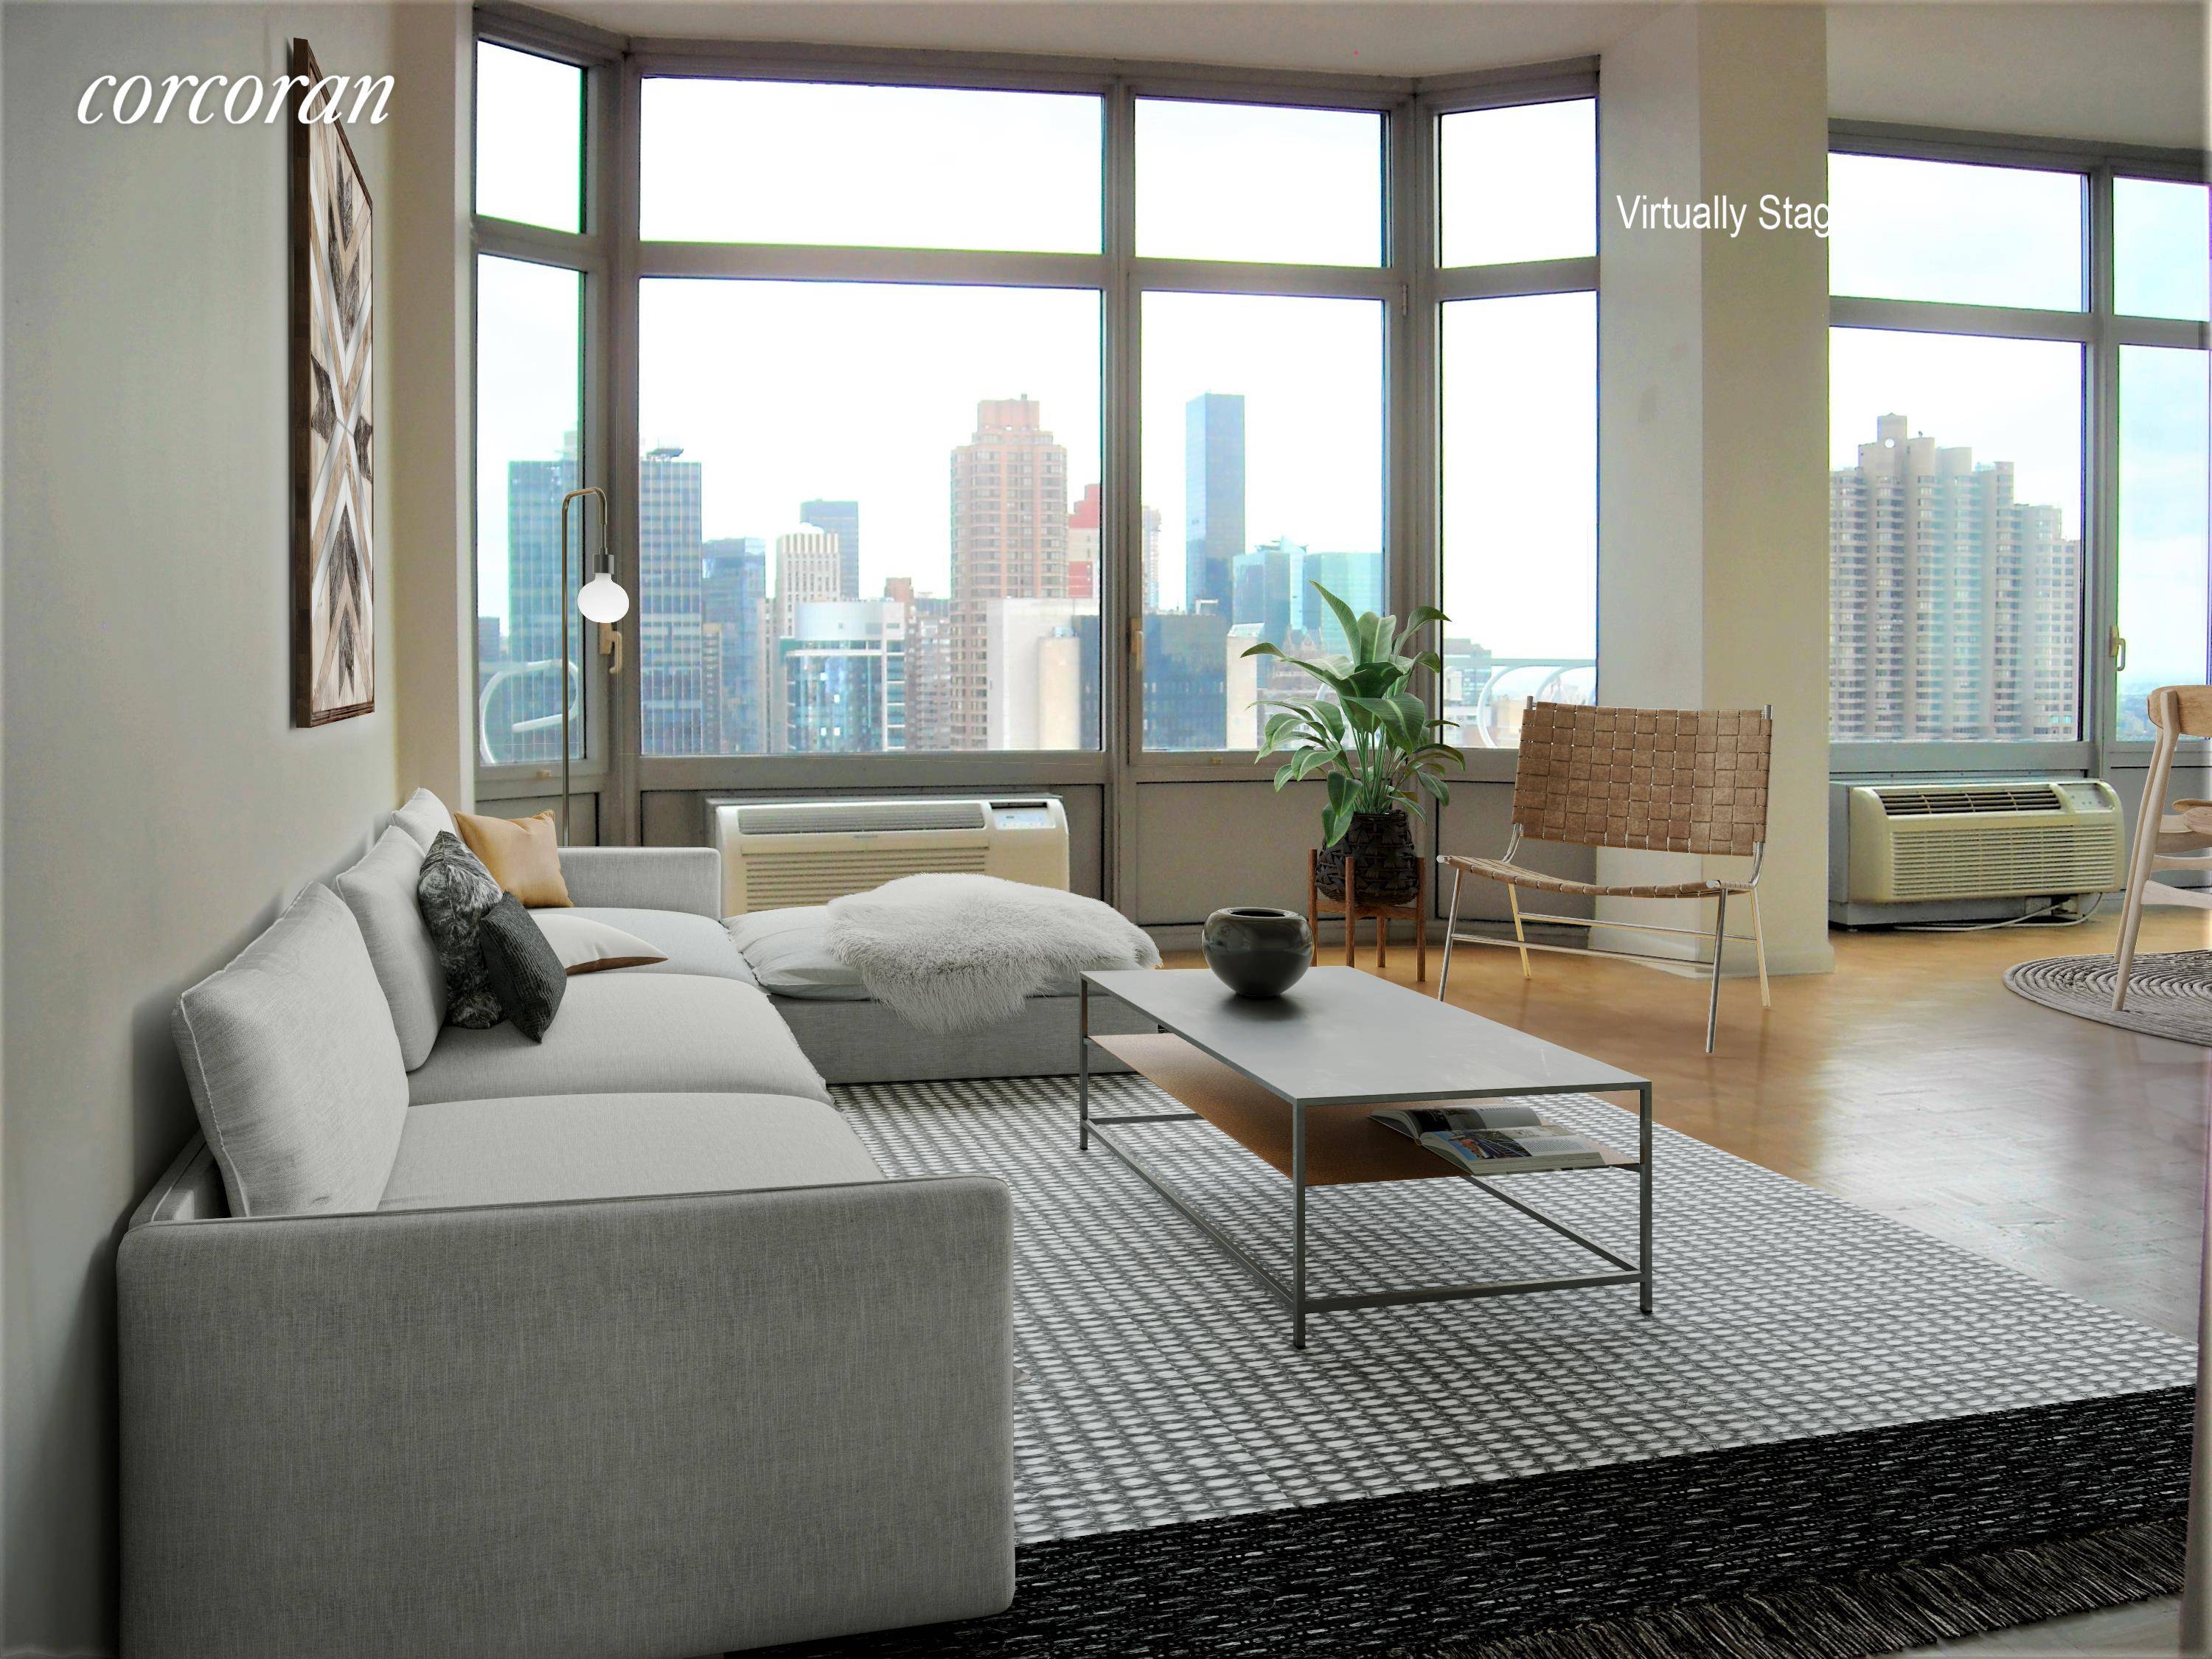 Enjoy the exceptional open city and East river views from every room in this high floor corner apartment.